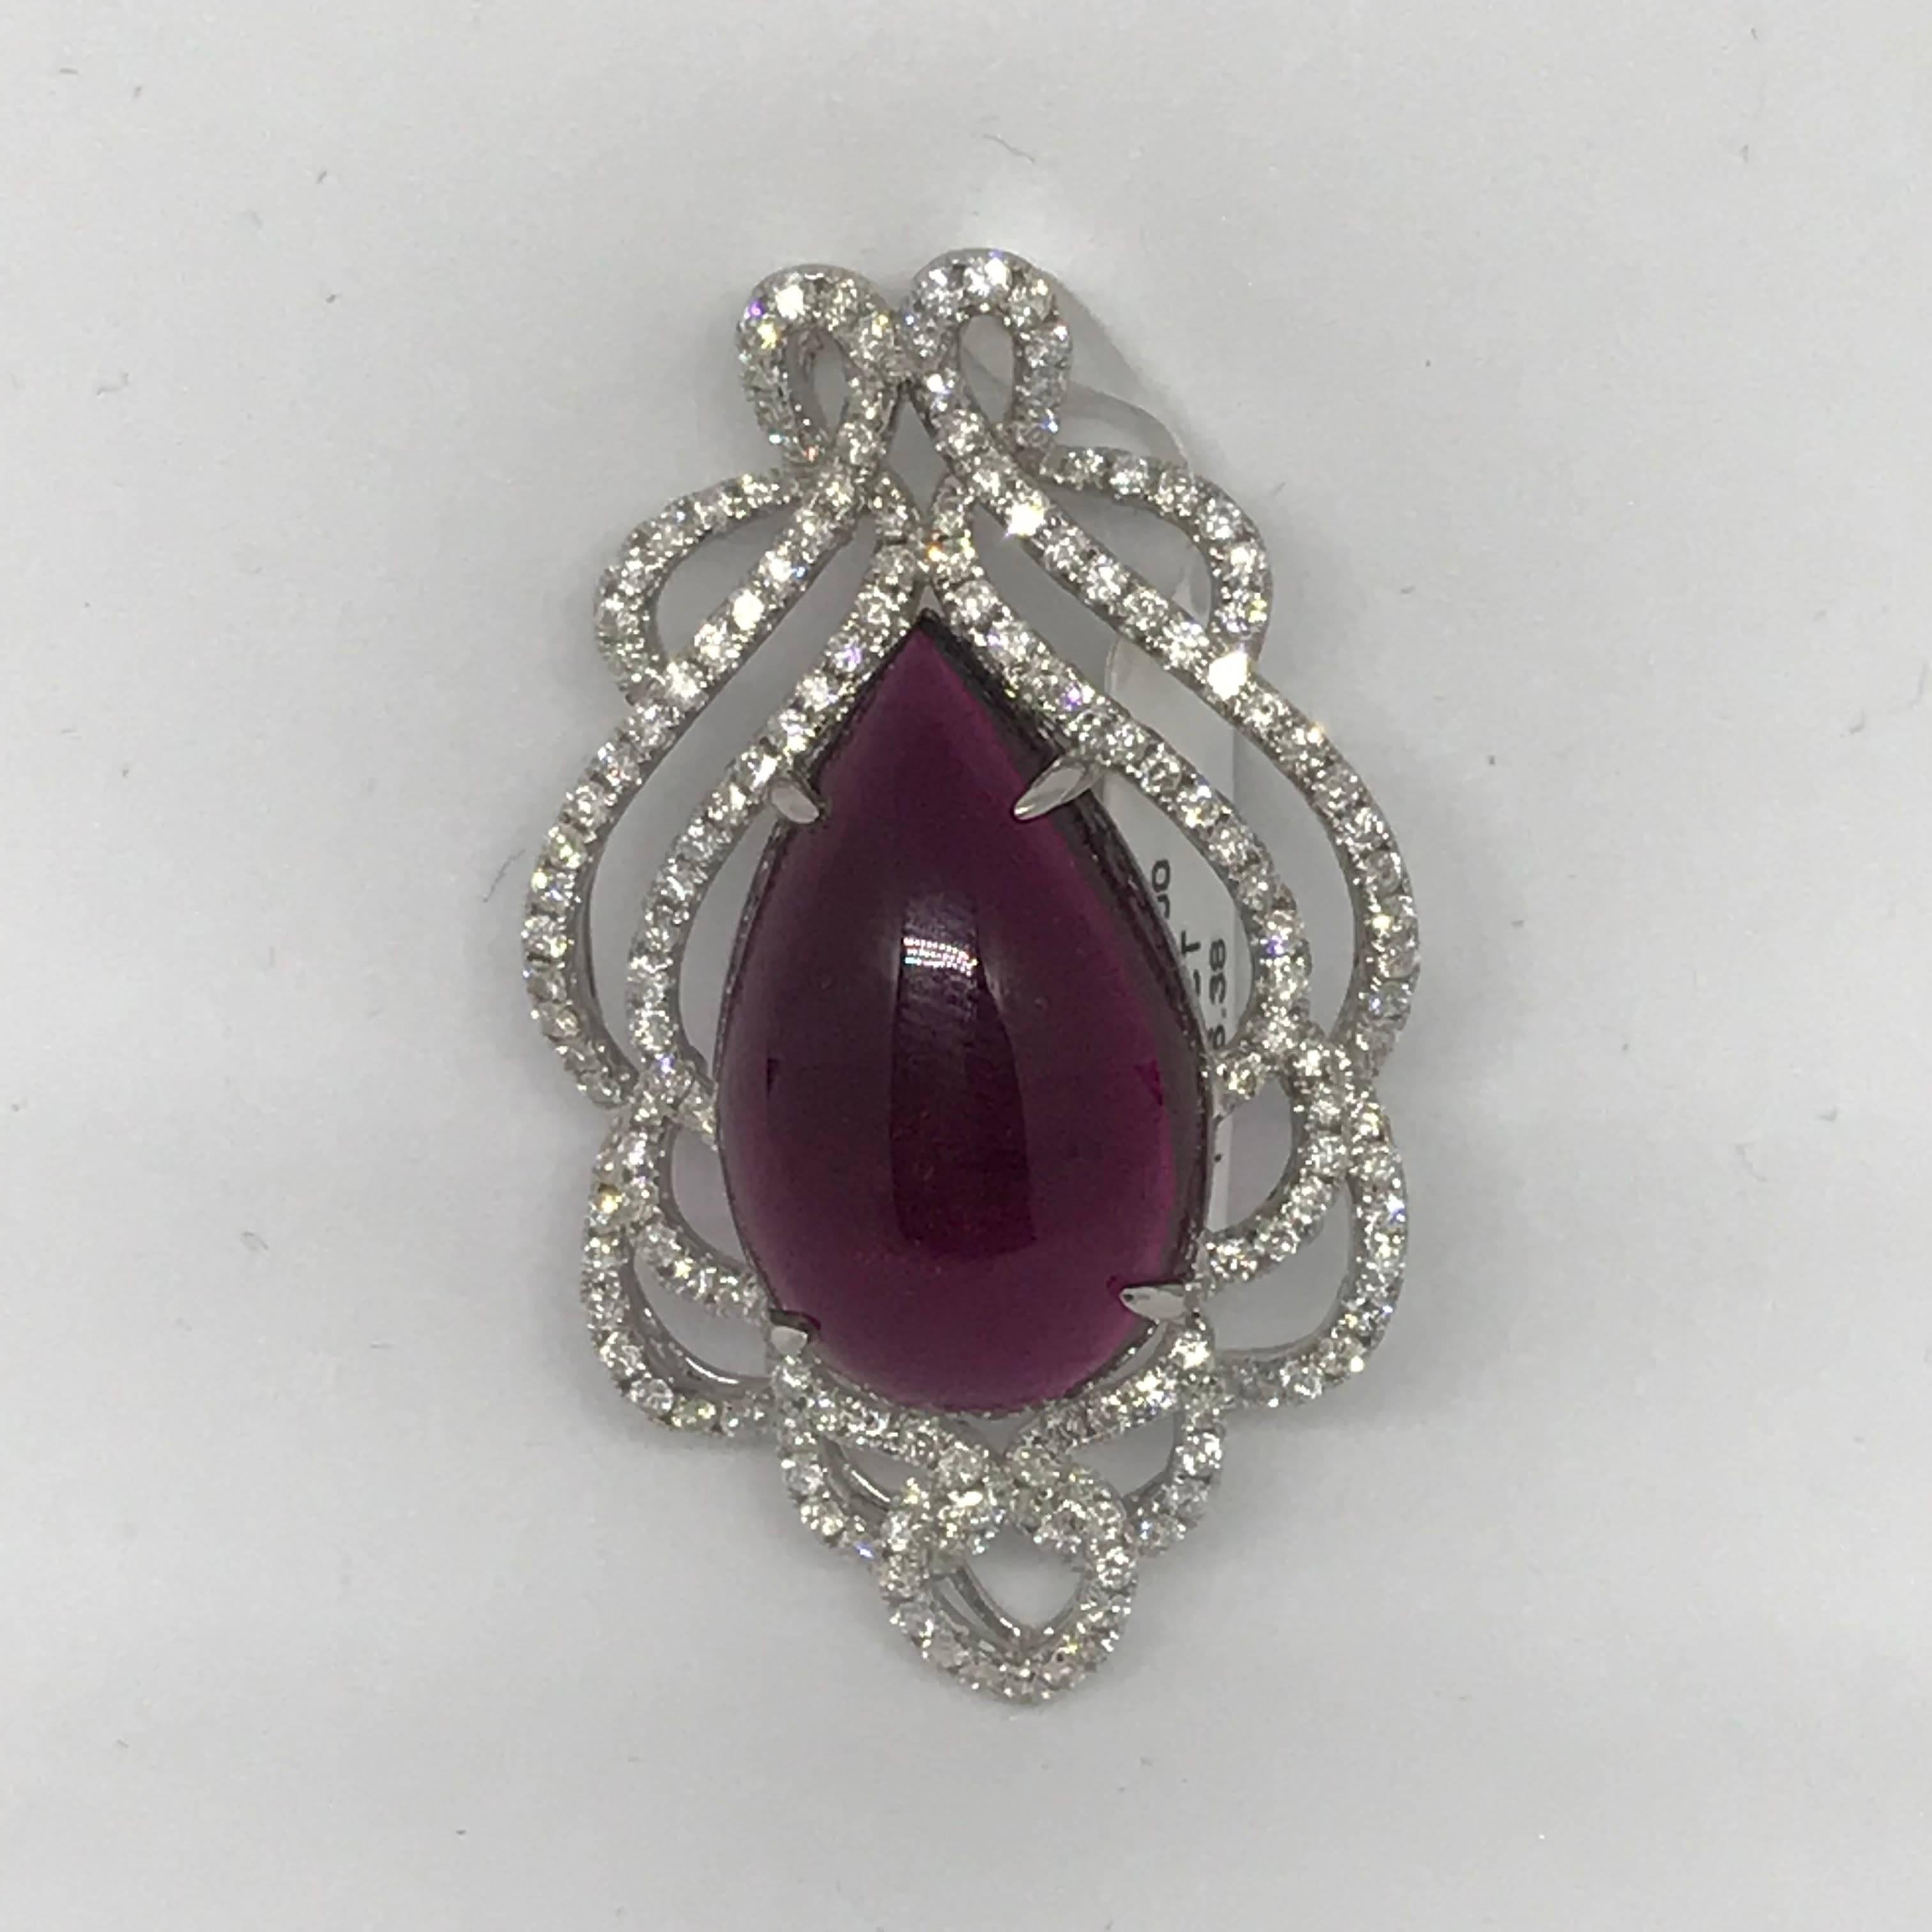 Most Exclusive top Quality Rubellite Pendant 
Diamonds F VVS 2.12carat
Top Quality Flawless Rubellite 26.36 carat
18k white gold
